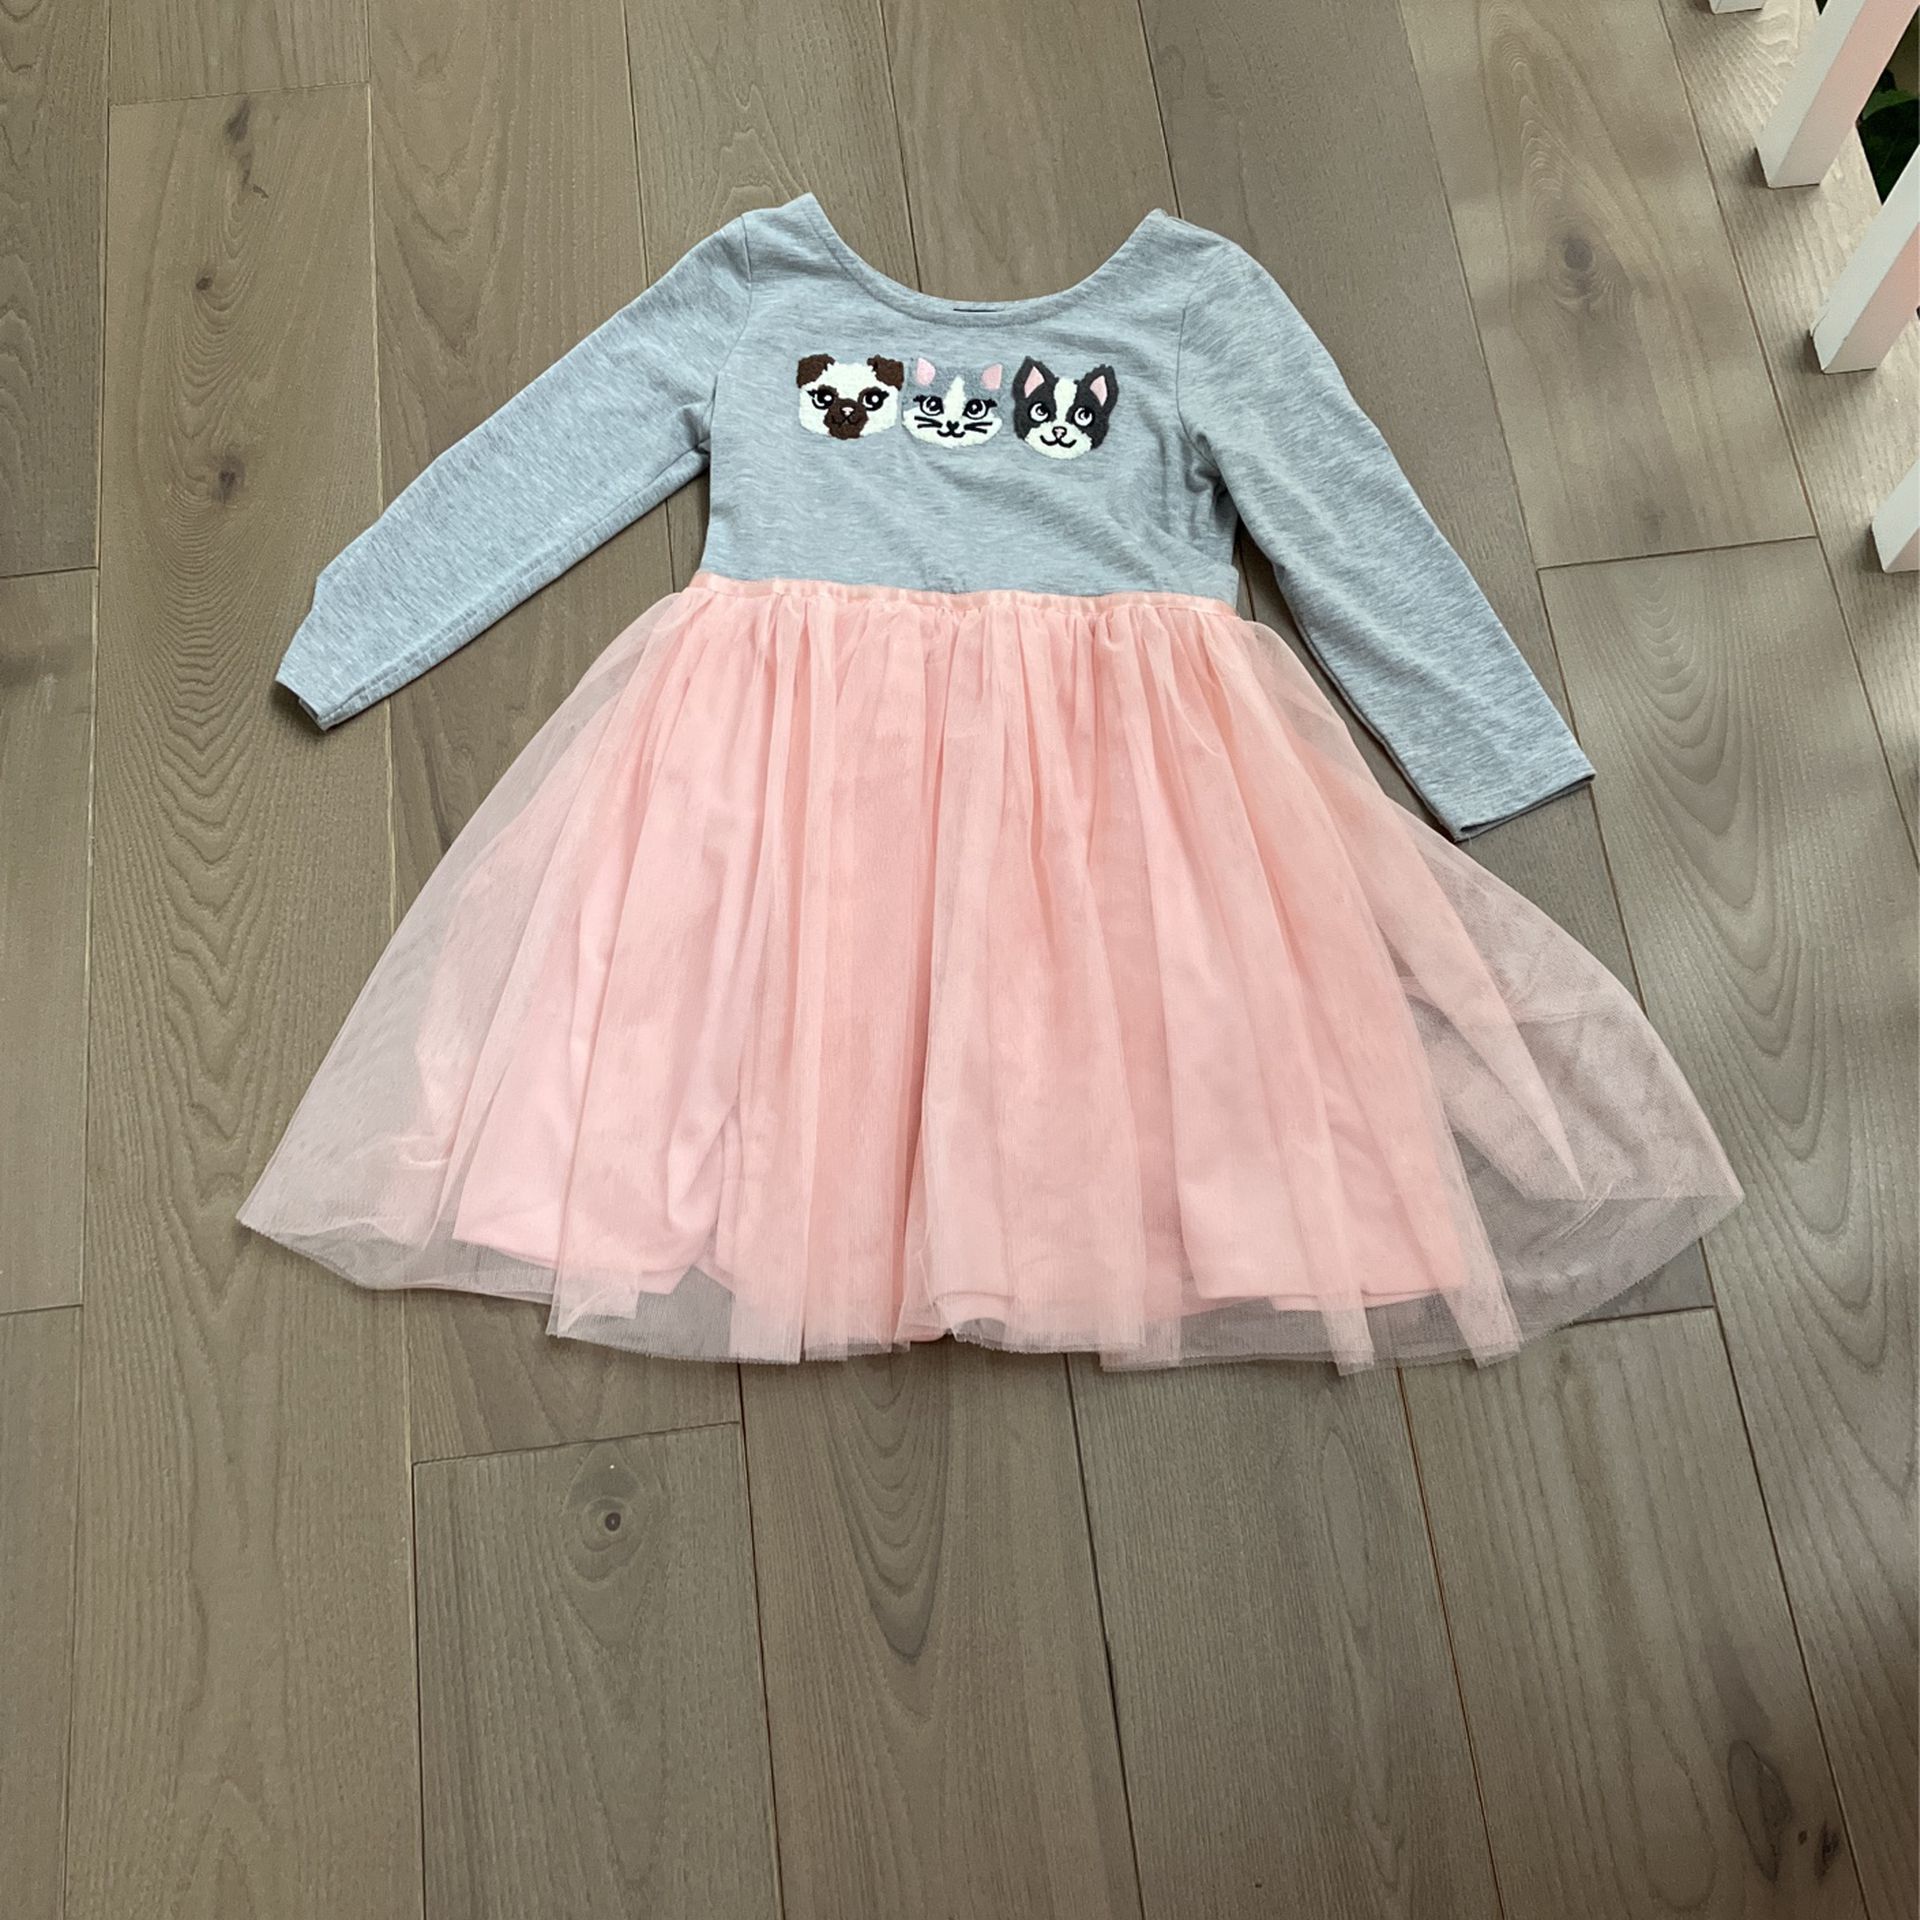 Pink and Gray dress. Ages 7/8